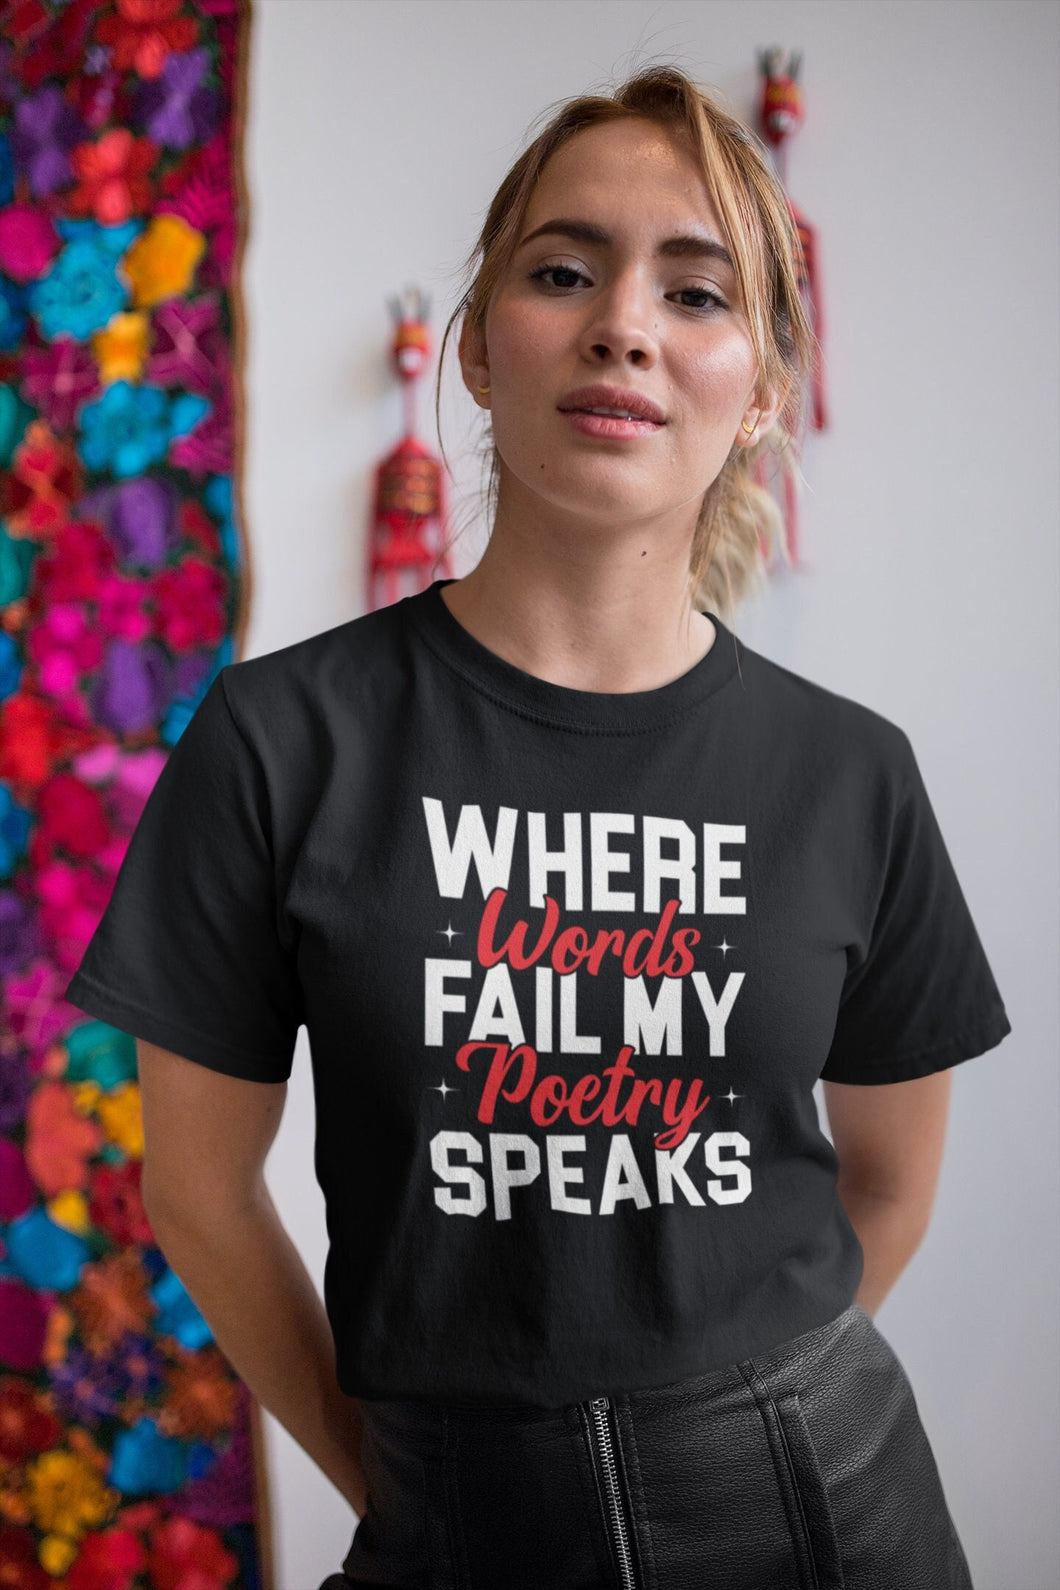 Where Words Fail My Poetry Speaks Shirt, Poetry Slam Writers, Poetry Addict Shirt, Poetry Shirt